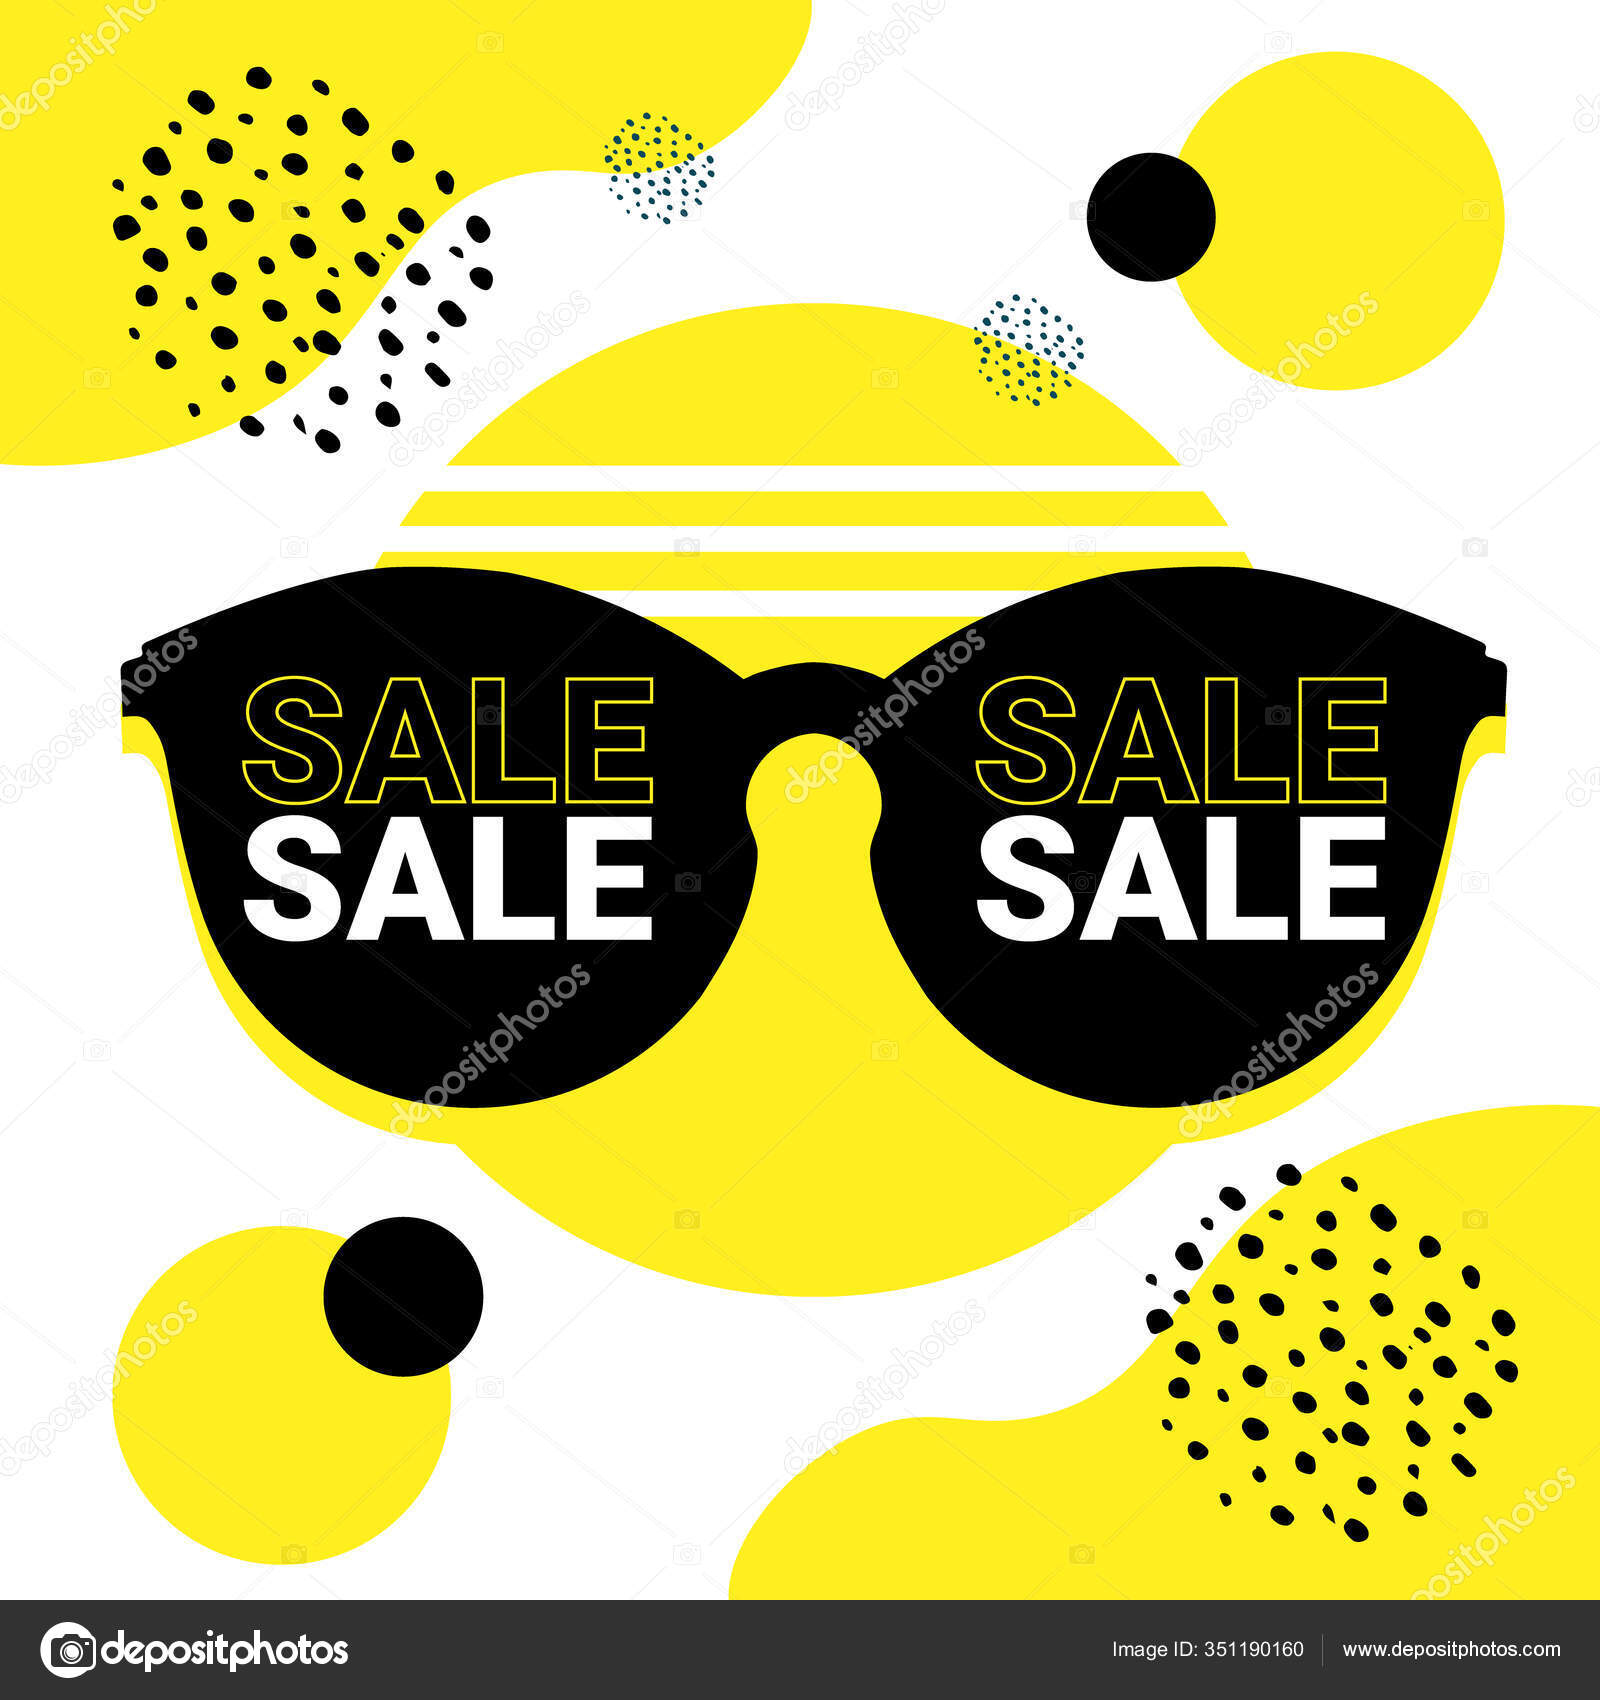 Sunglasses icon design template Royalty Free Vector Image